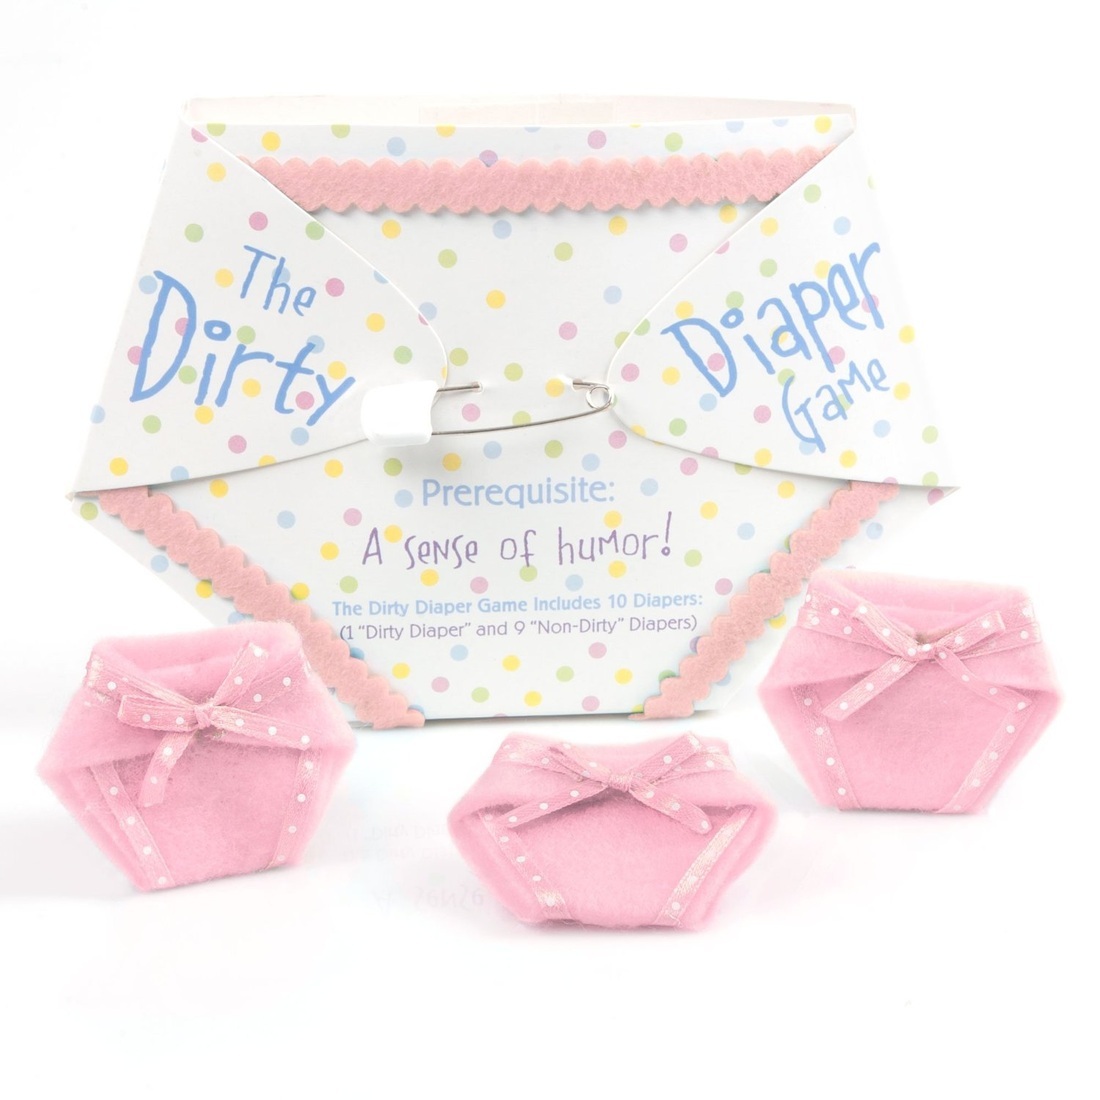  The Dirty Diaper Game - Pink